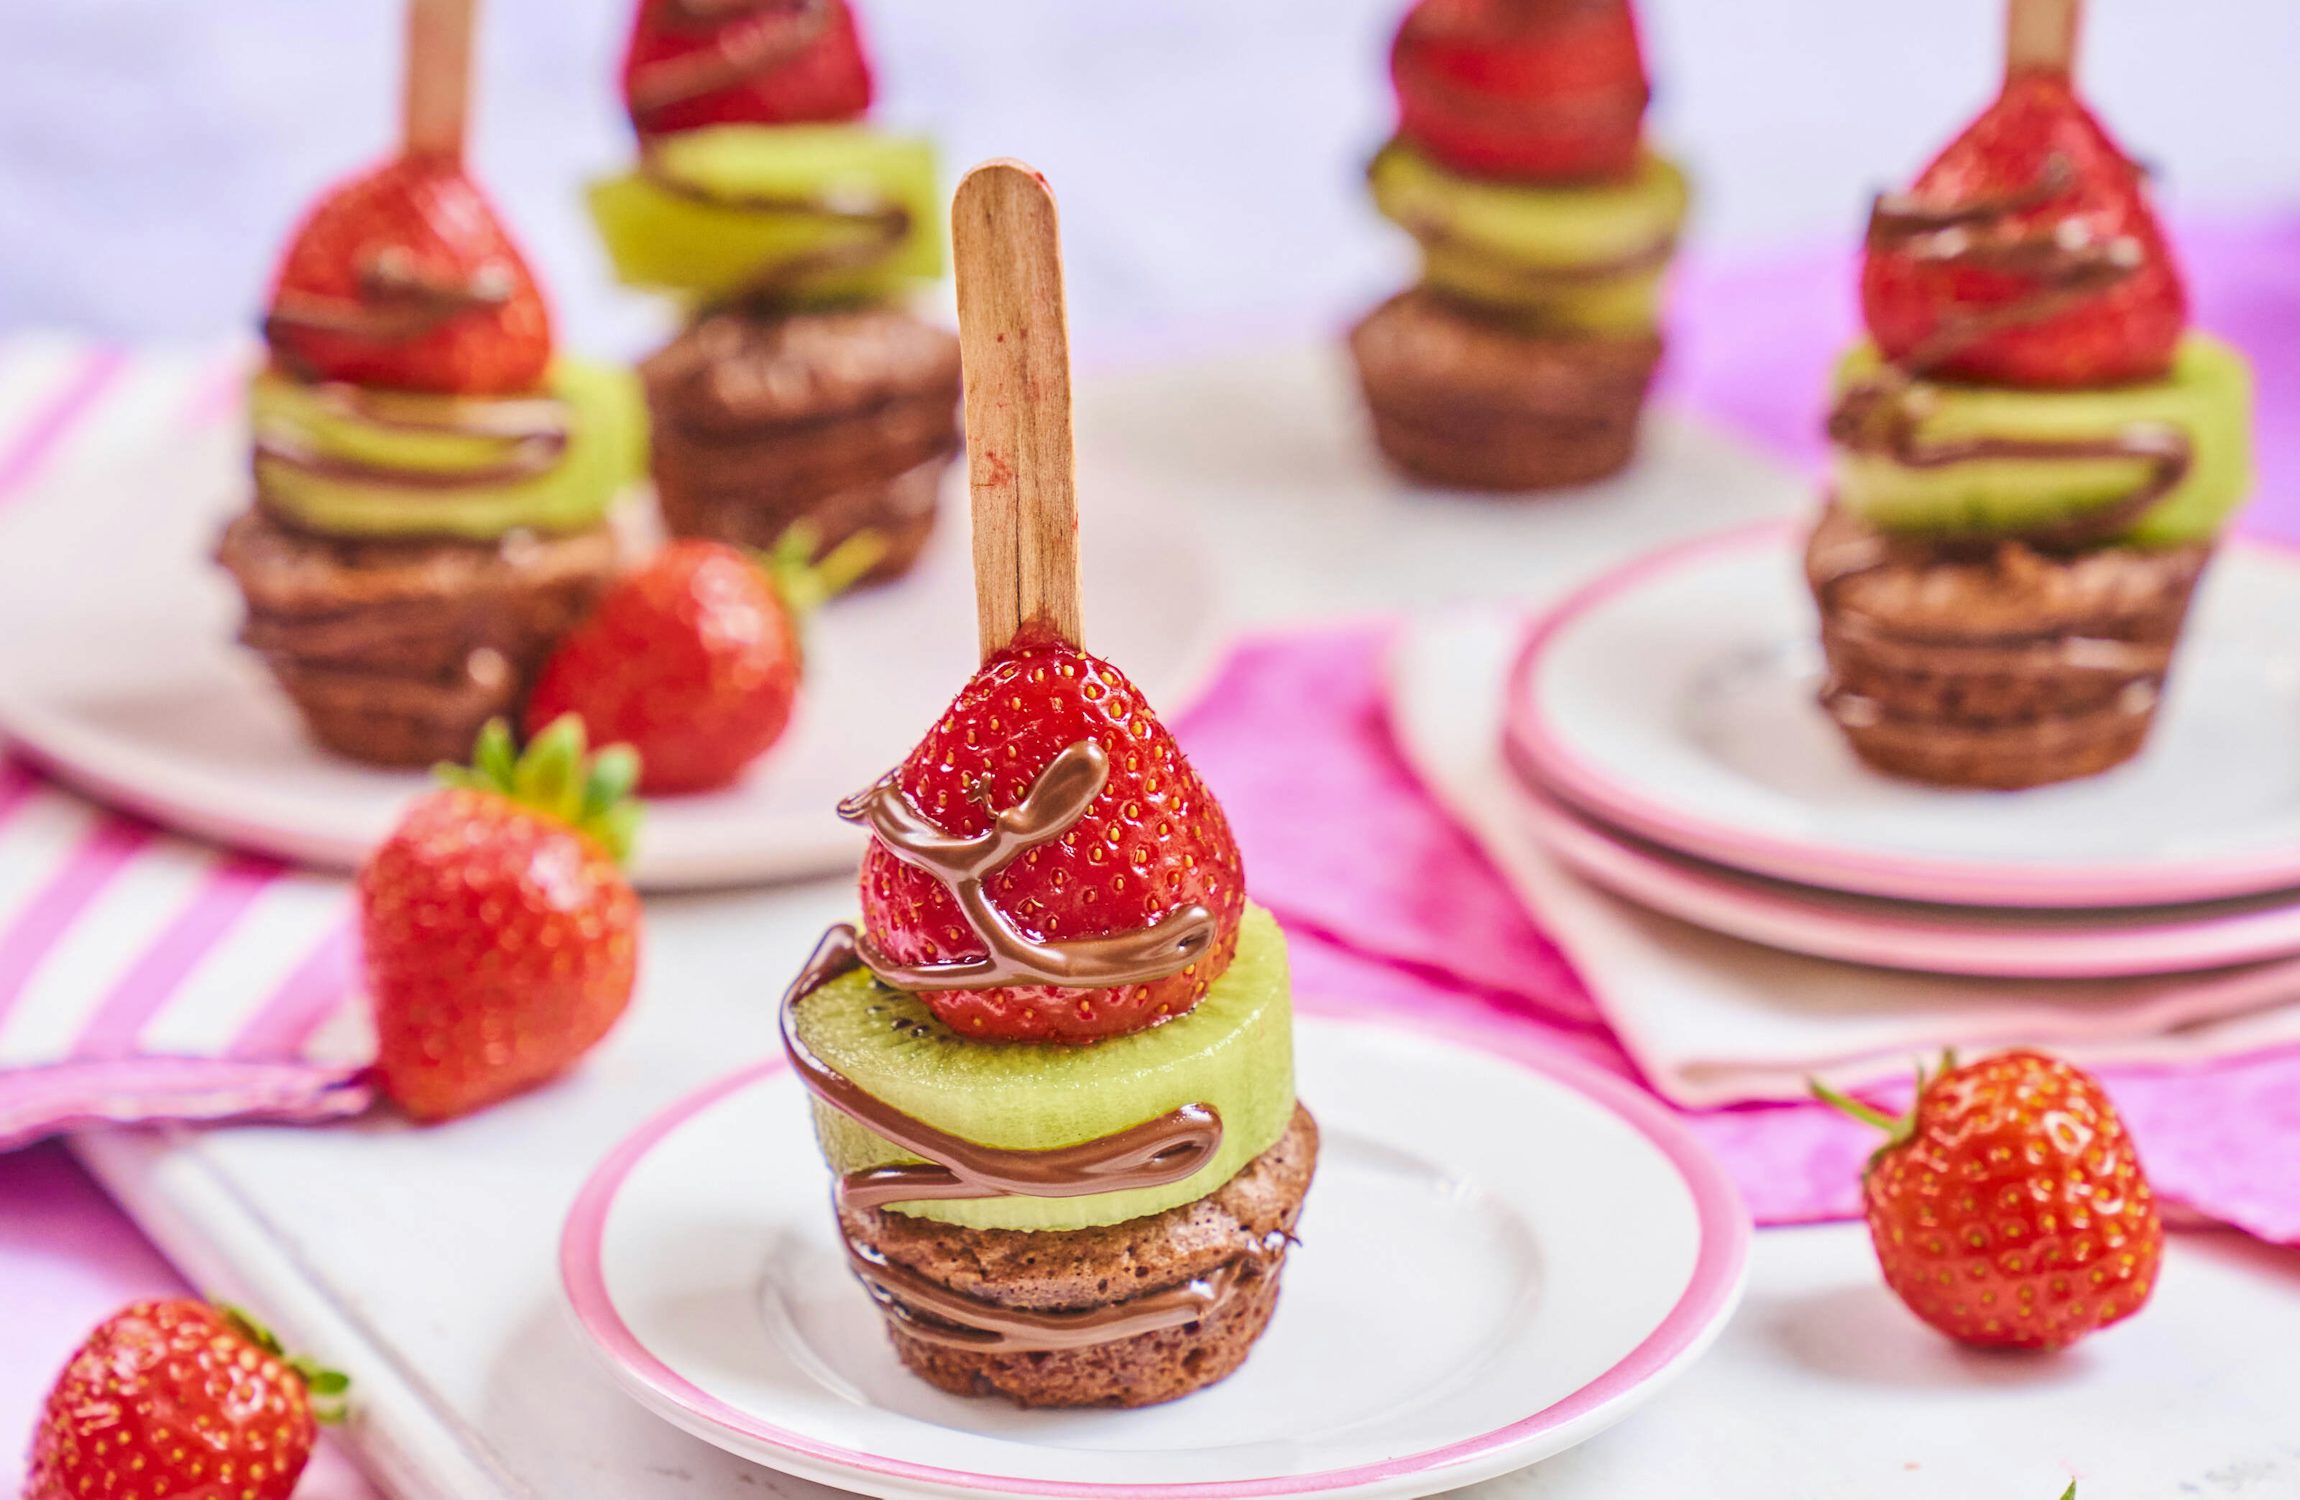 Strawberry & beets brownie rockets